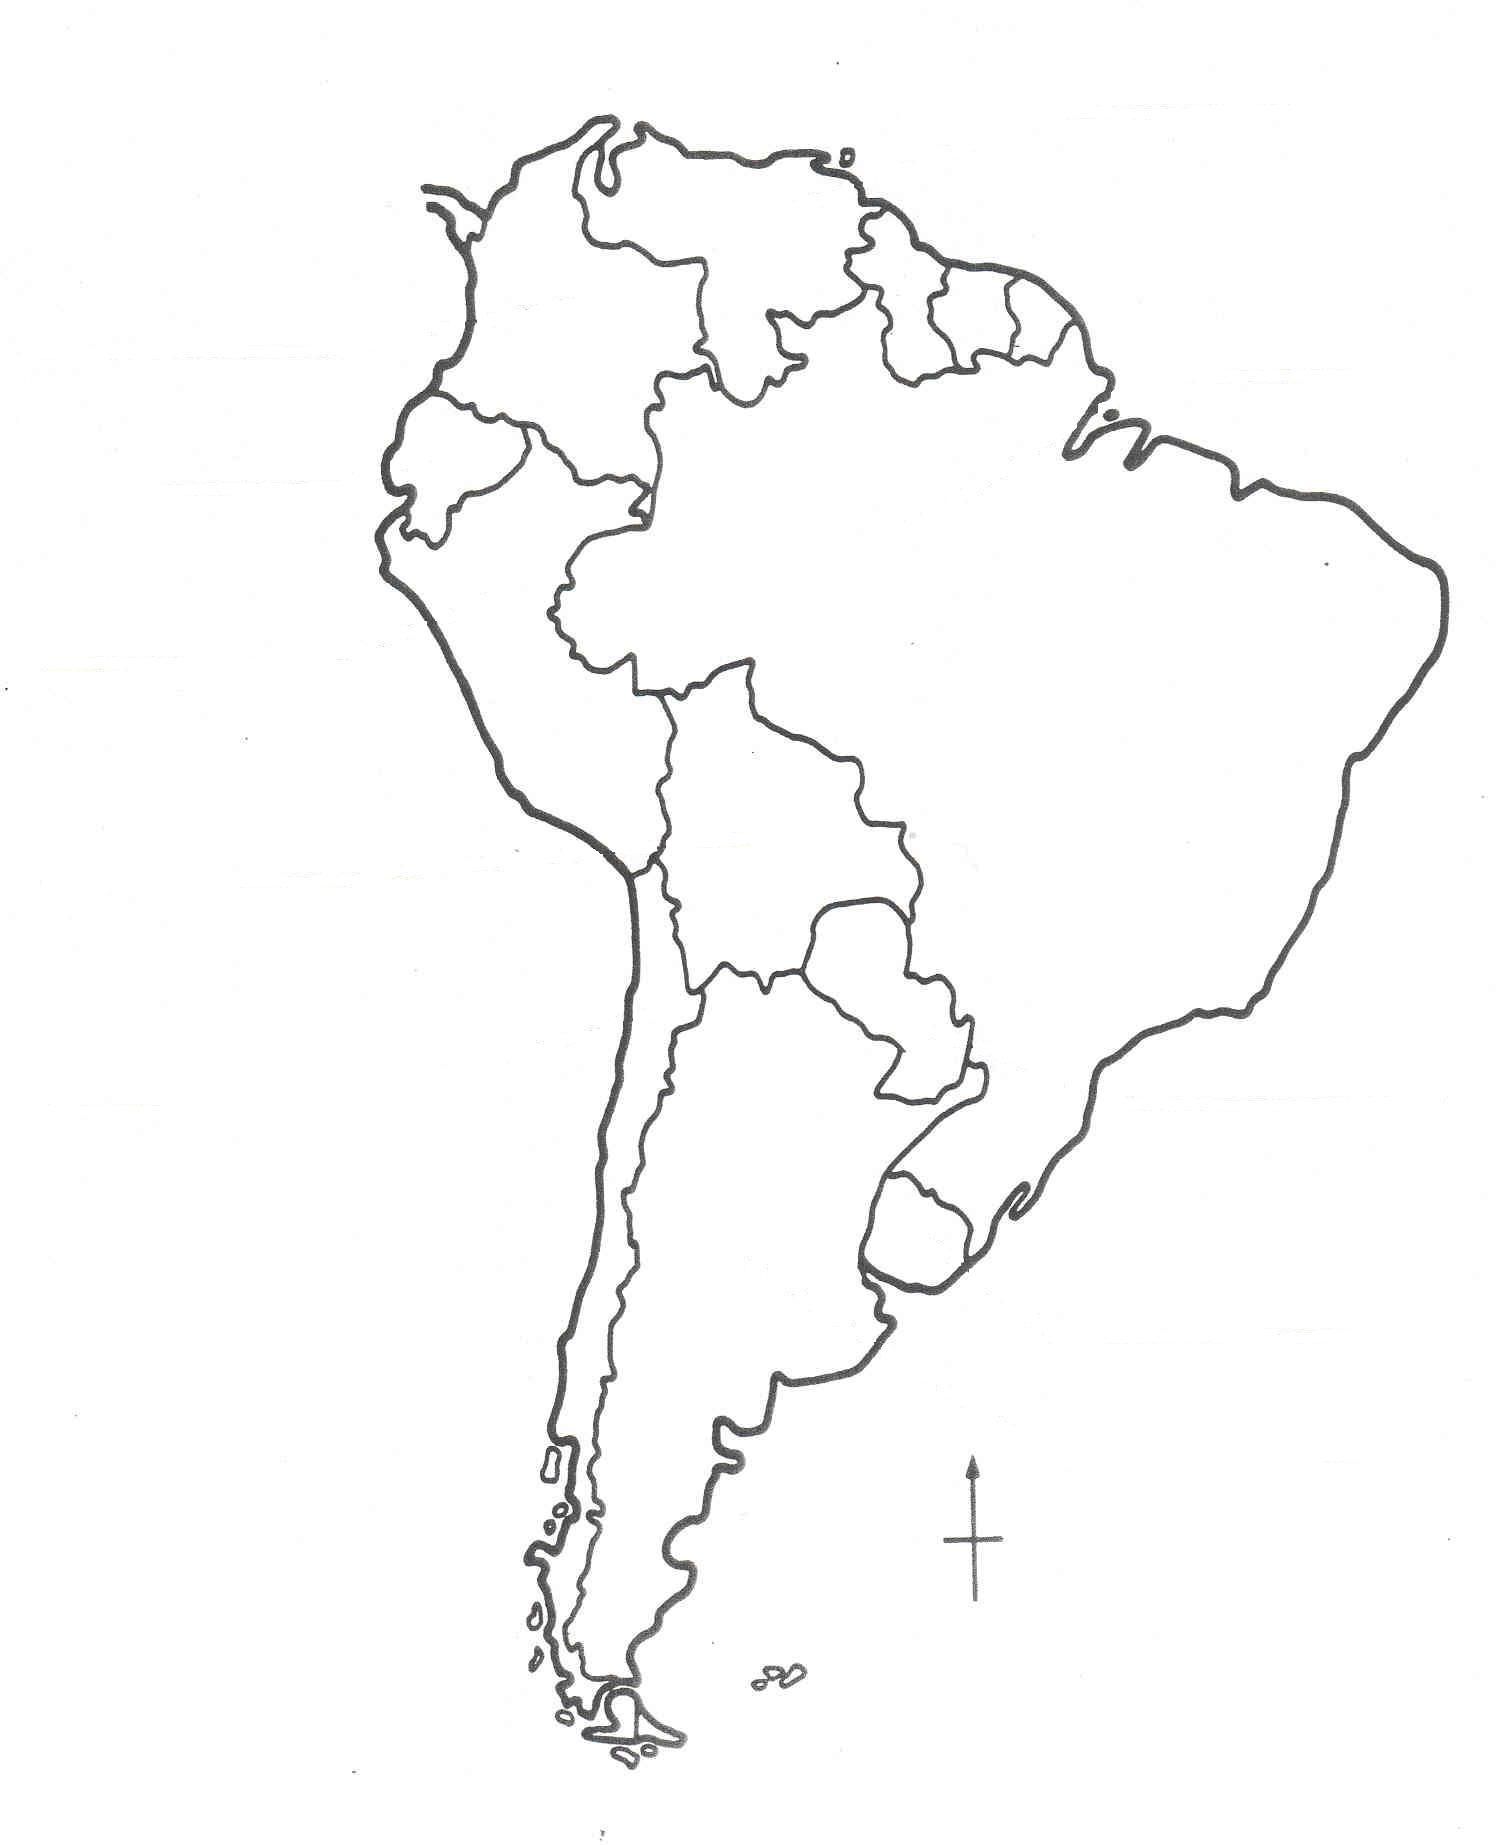 south america map for coloring - Clip Art Library